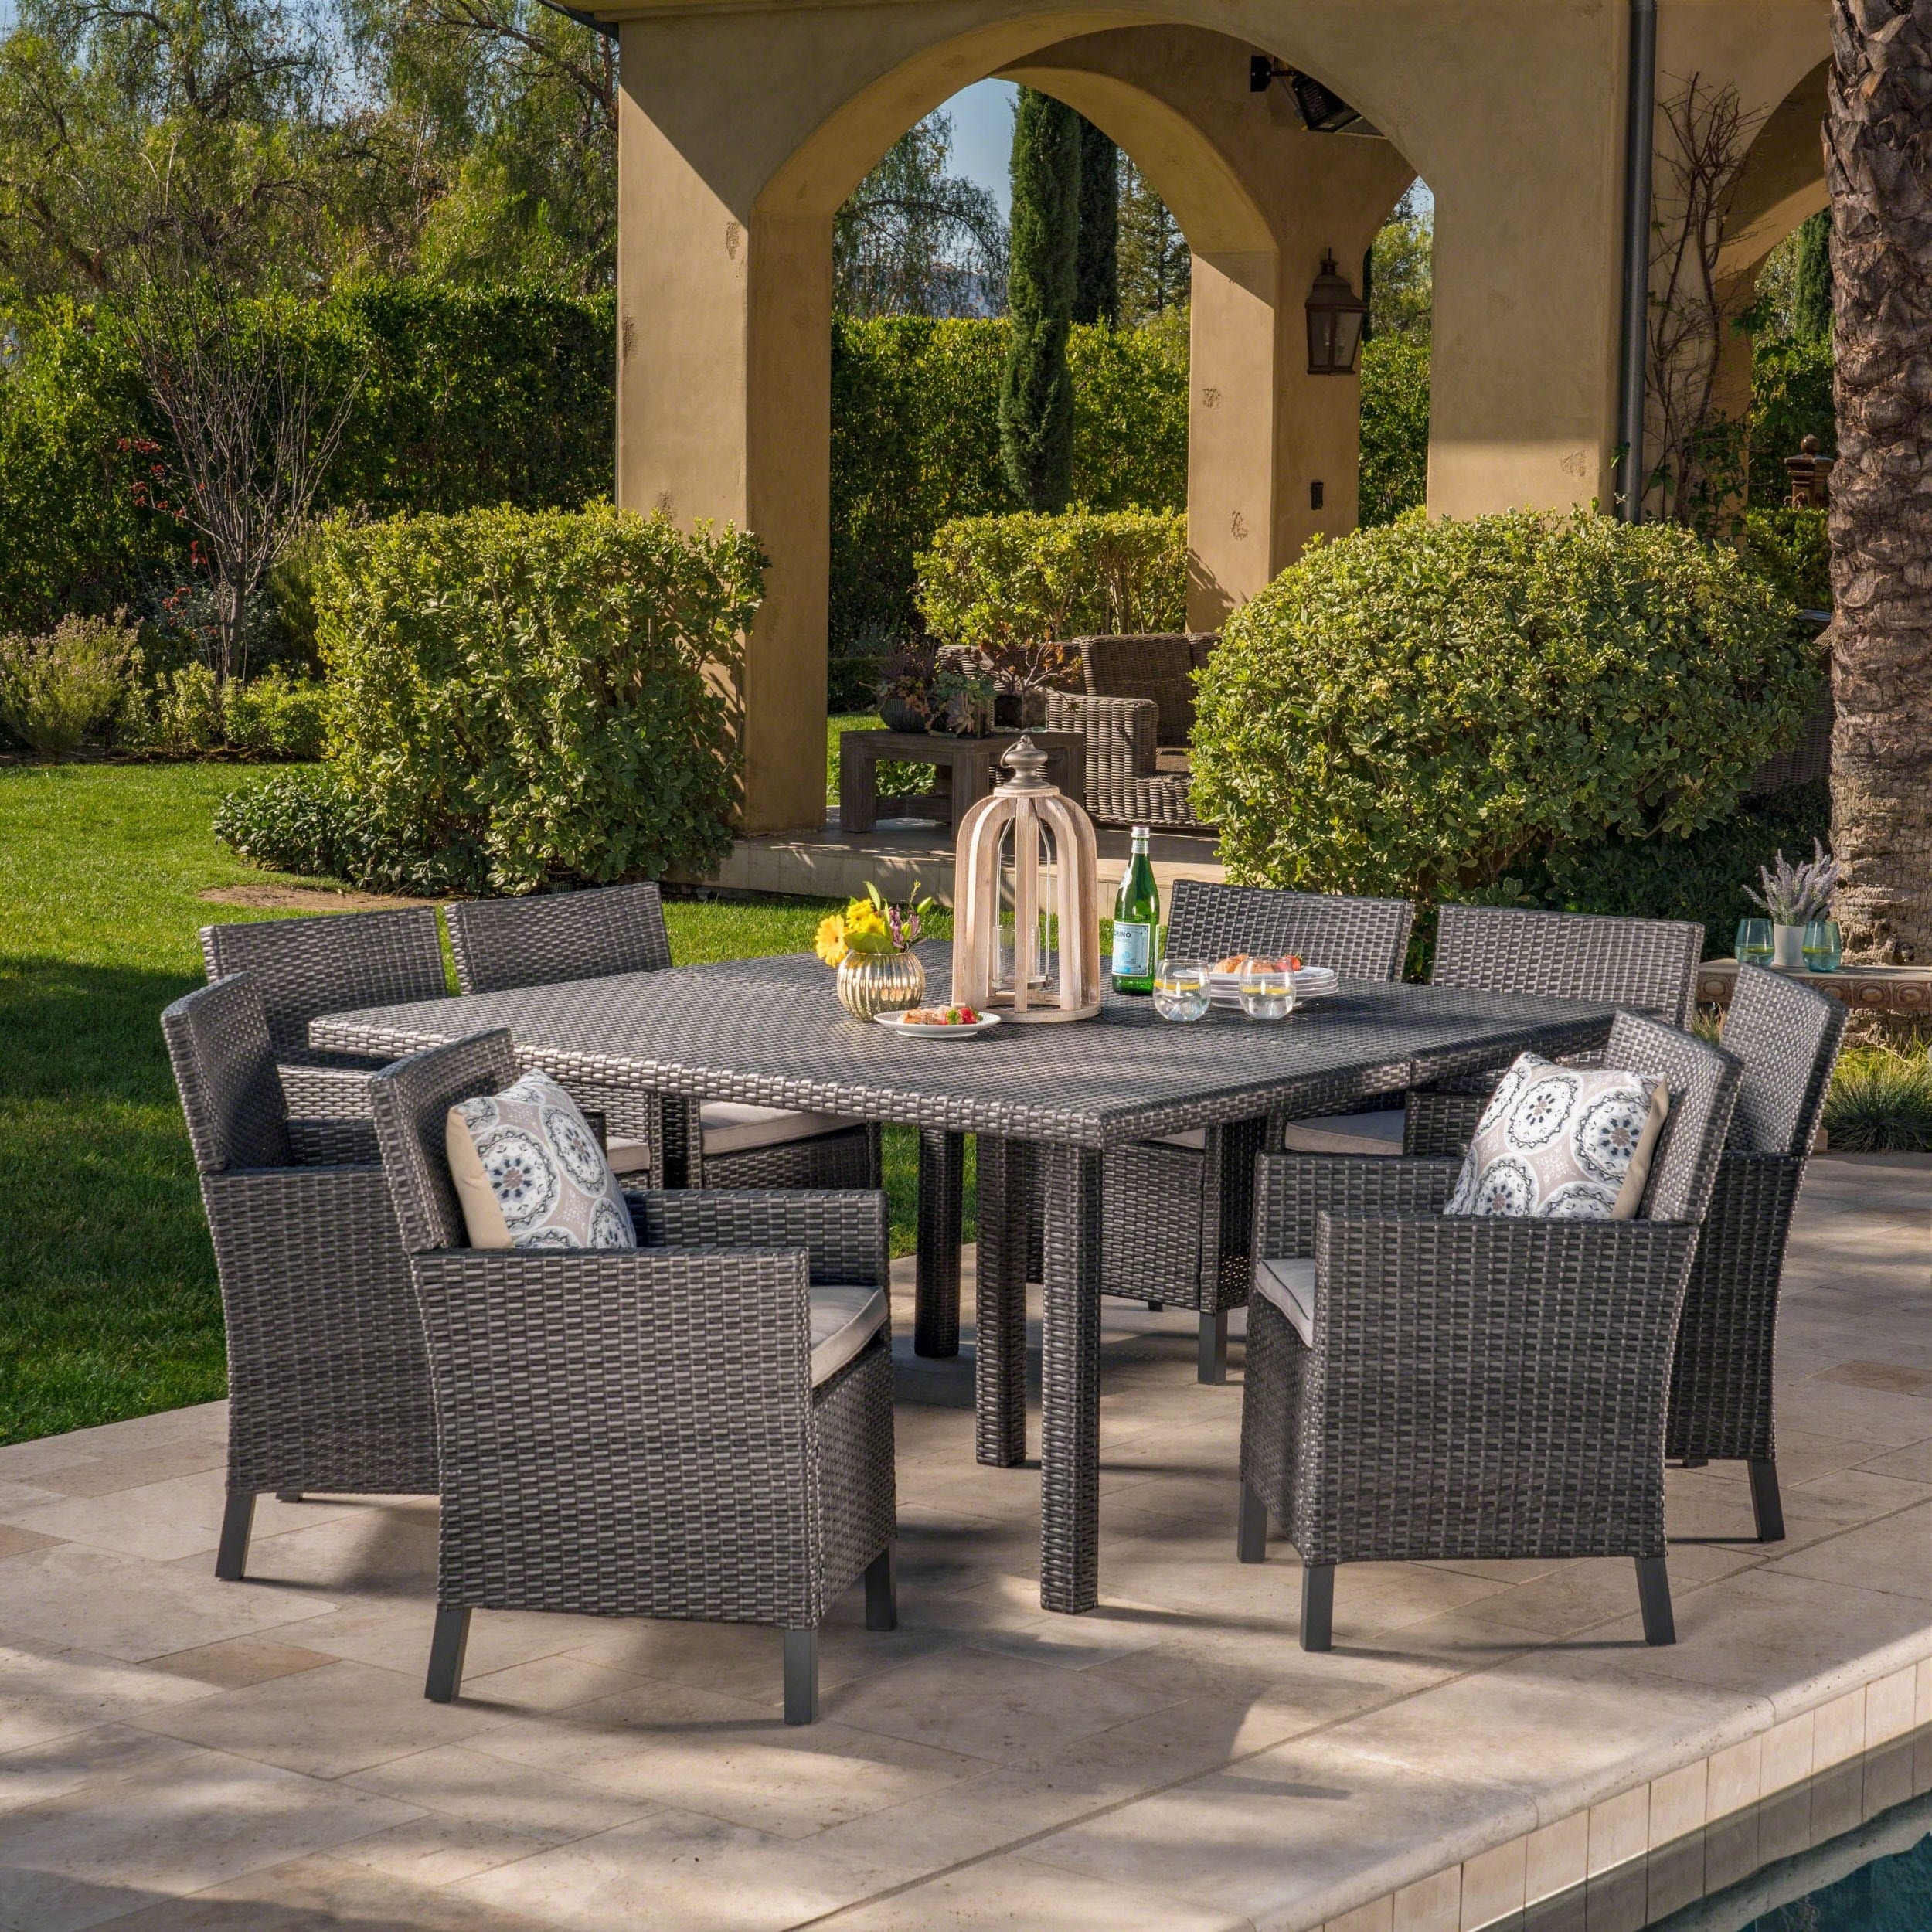 Arcade Outdoor 9-piece Square Wicker Dining Set With Cushions By Christopher Knight Home - N/a